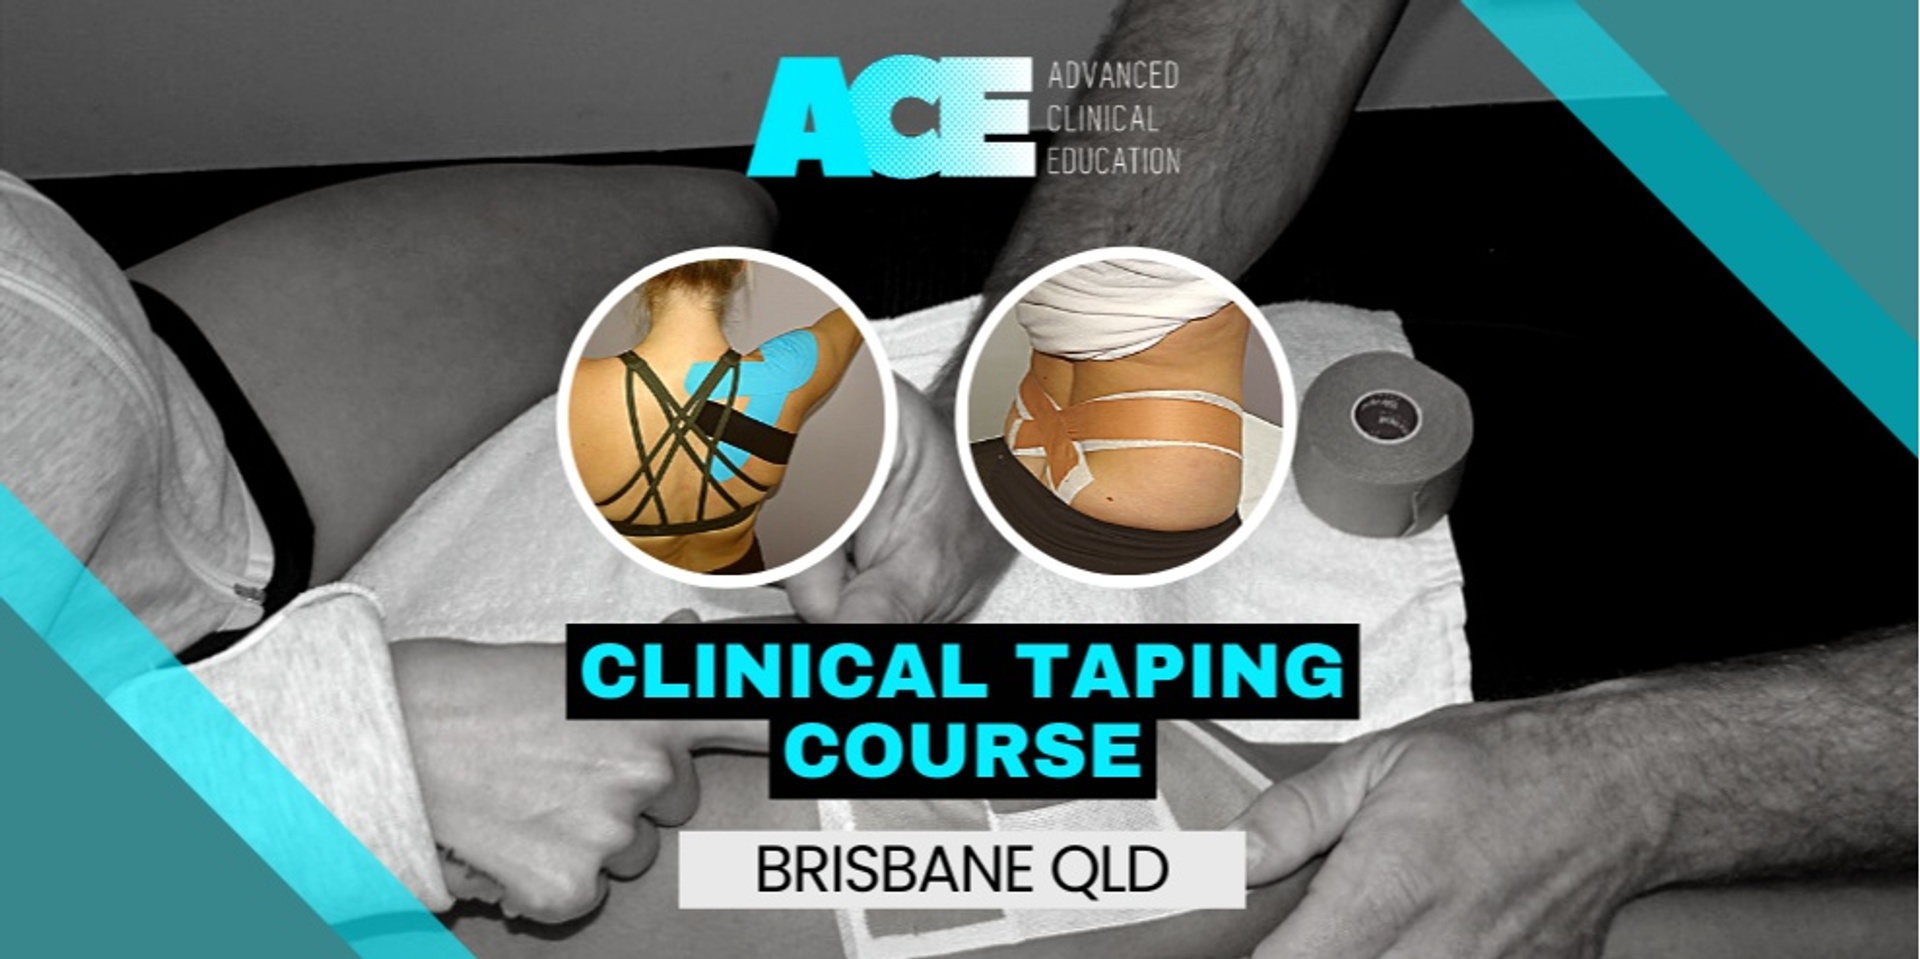 Clinical Taping Course (Brisbane QLD)